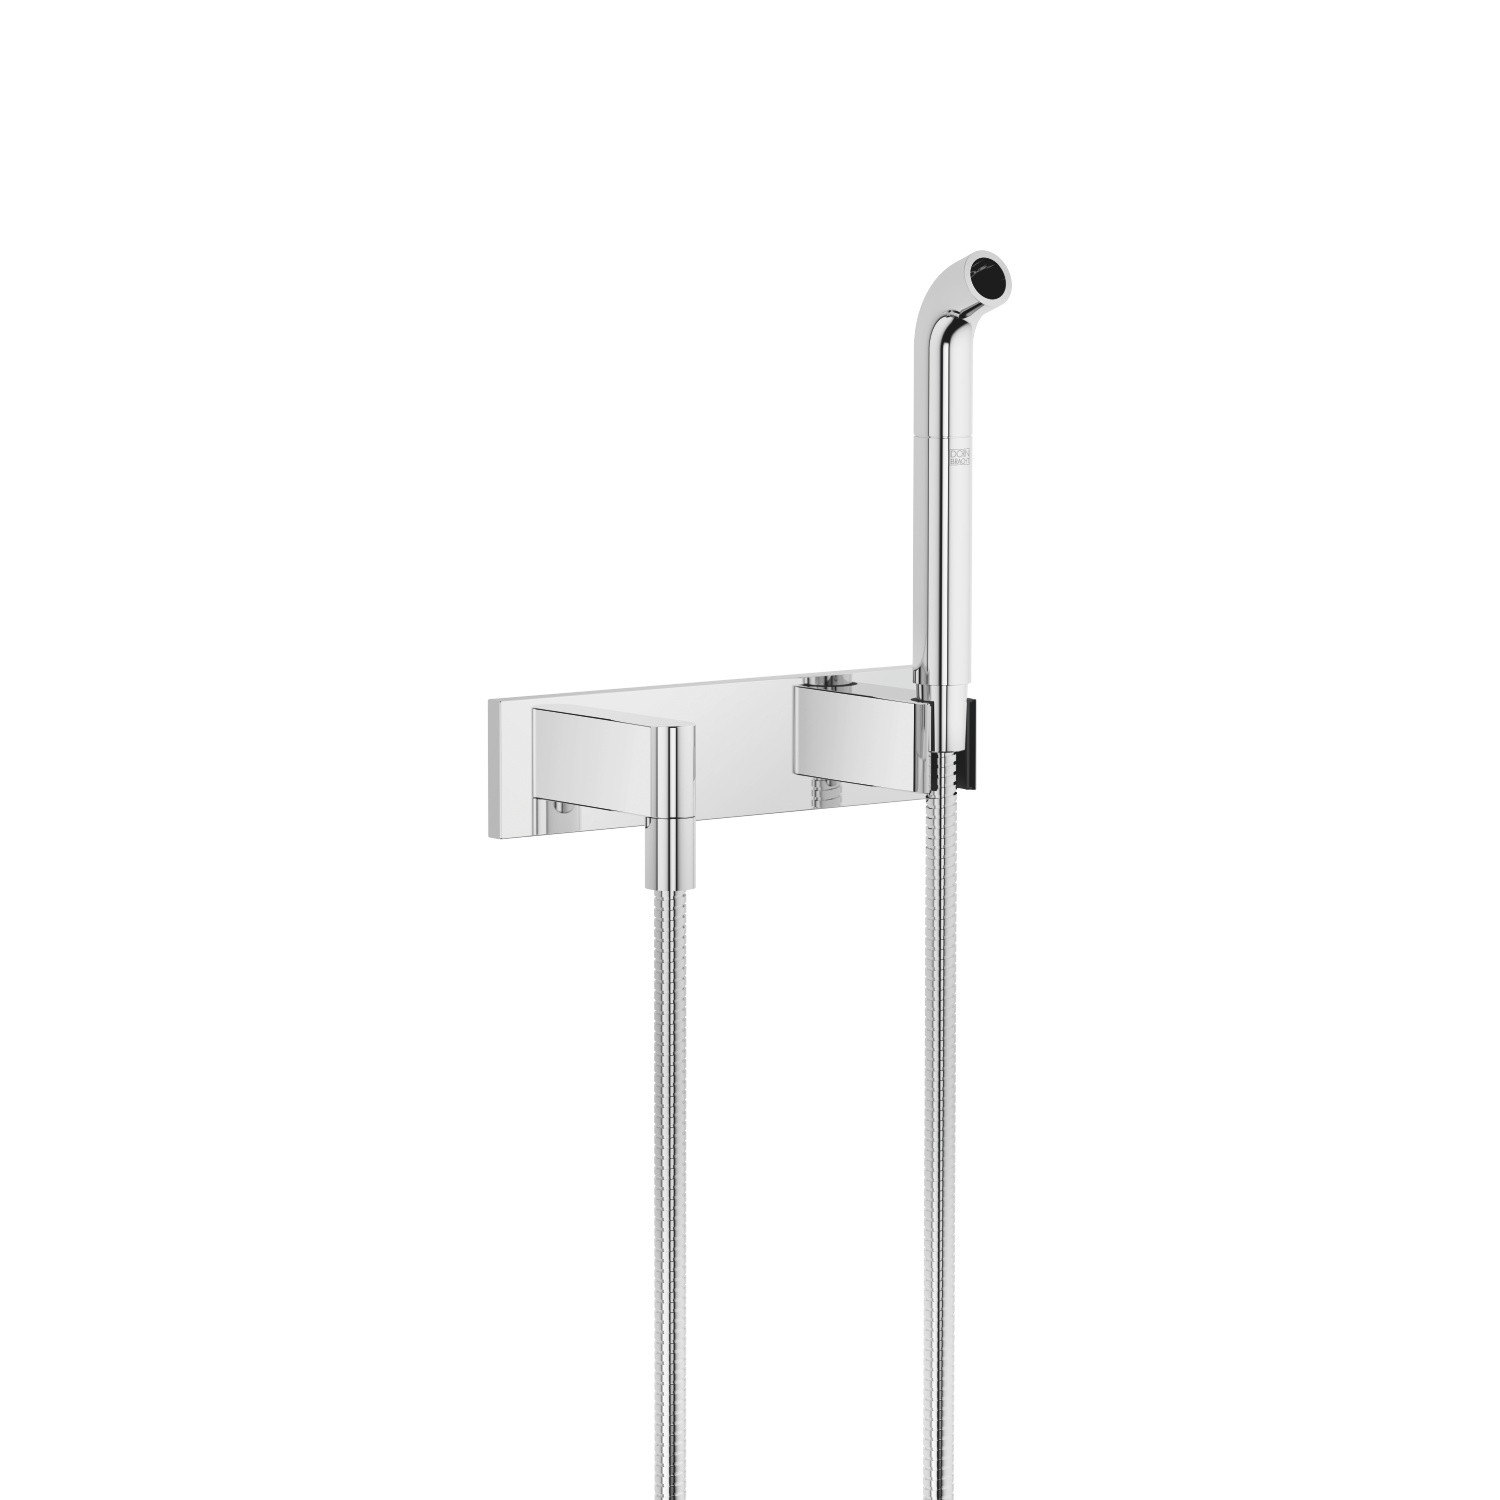 DORNBRACHT 27848979-000010 1.8 GPM WALL MOUNT AFFUSION PIPE HAND SHOWER FOR KNEIPP TREATMENTS WITH COVER PLATE